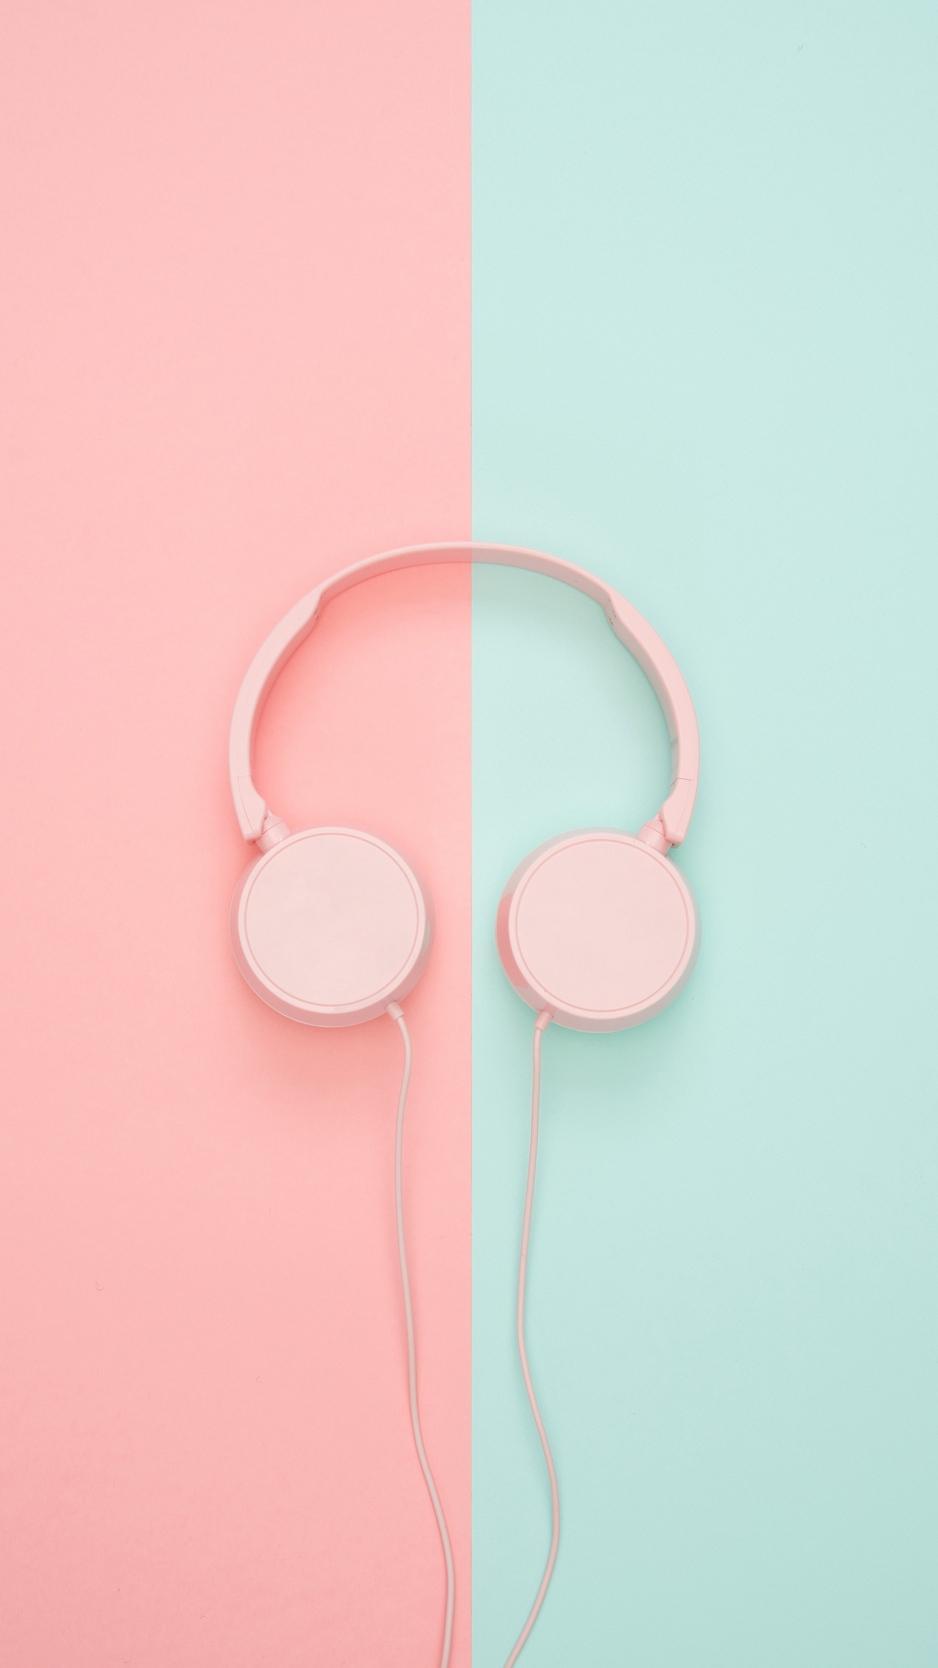 Pastel Wallpaper For Android Apk